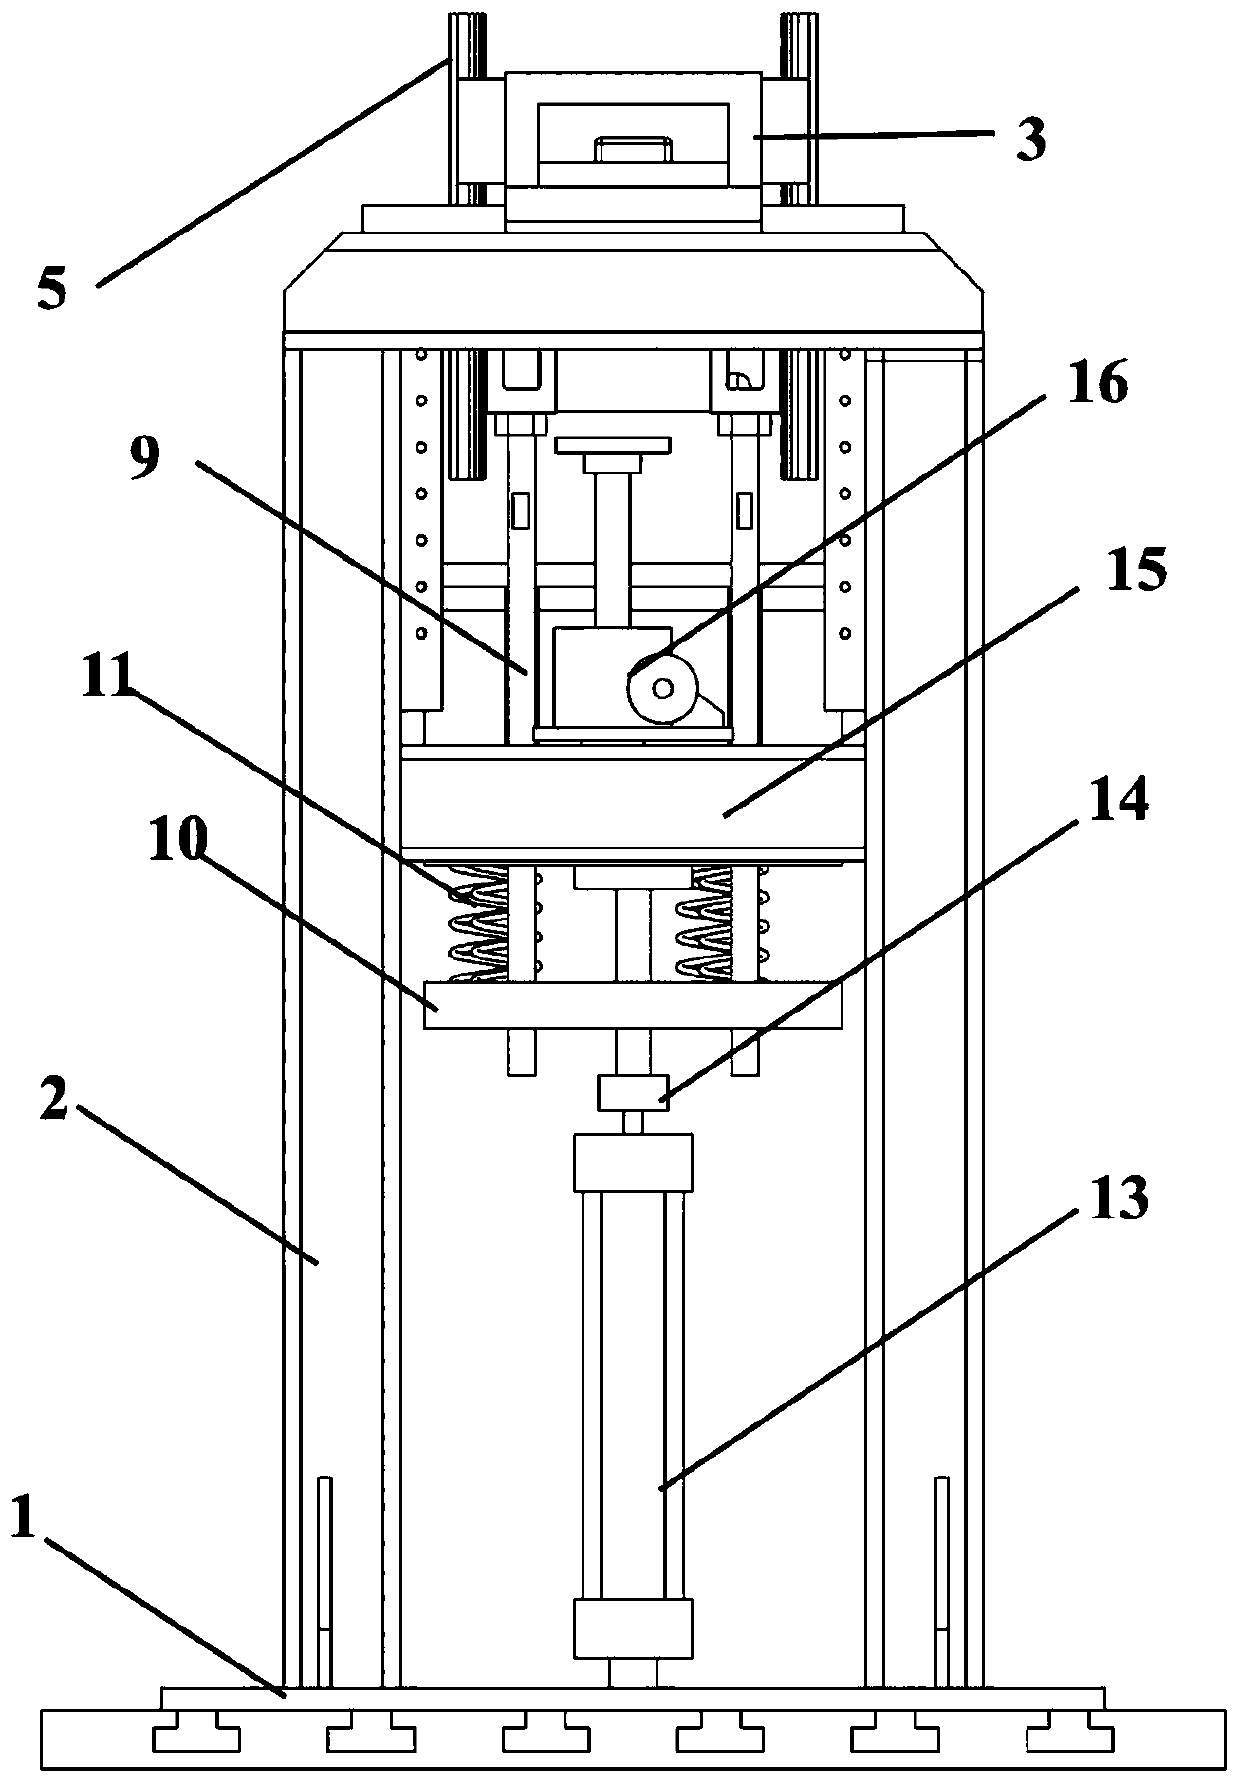 Test device capable of simulating vibration of magnetic suspension vehicle under aerodynamic force conditions